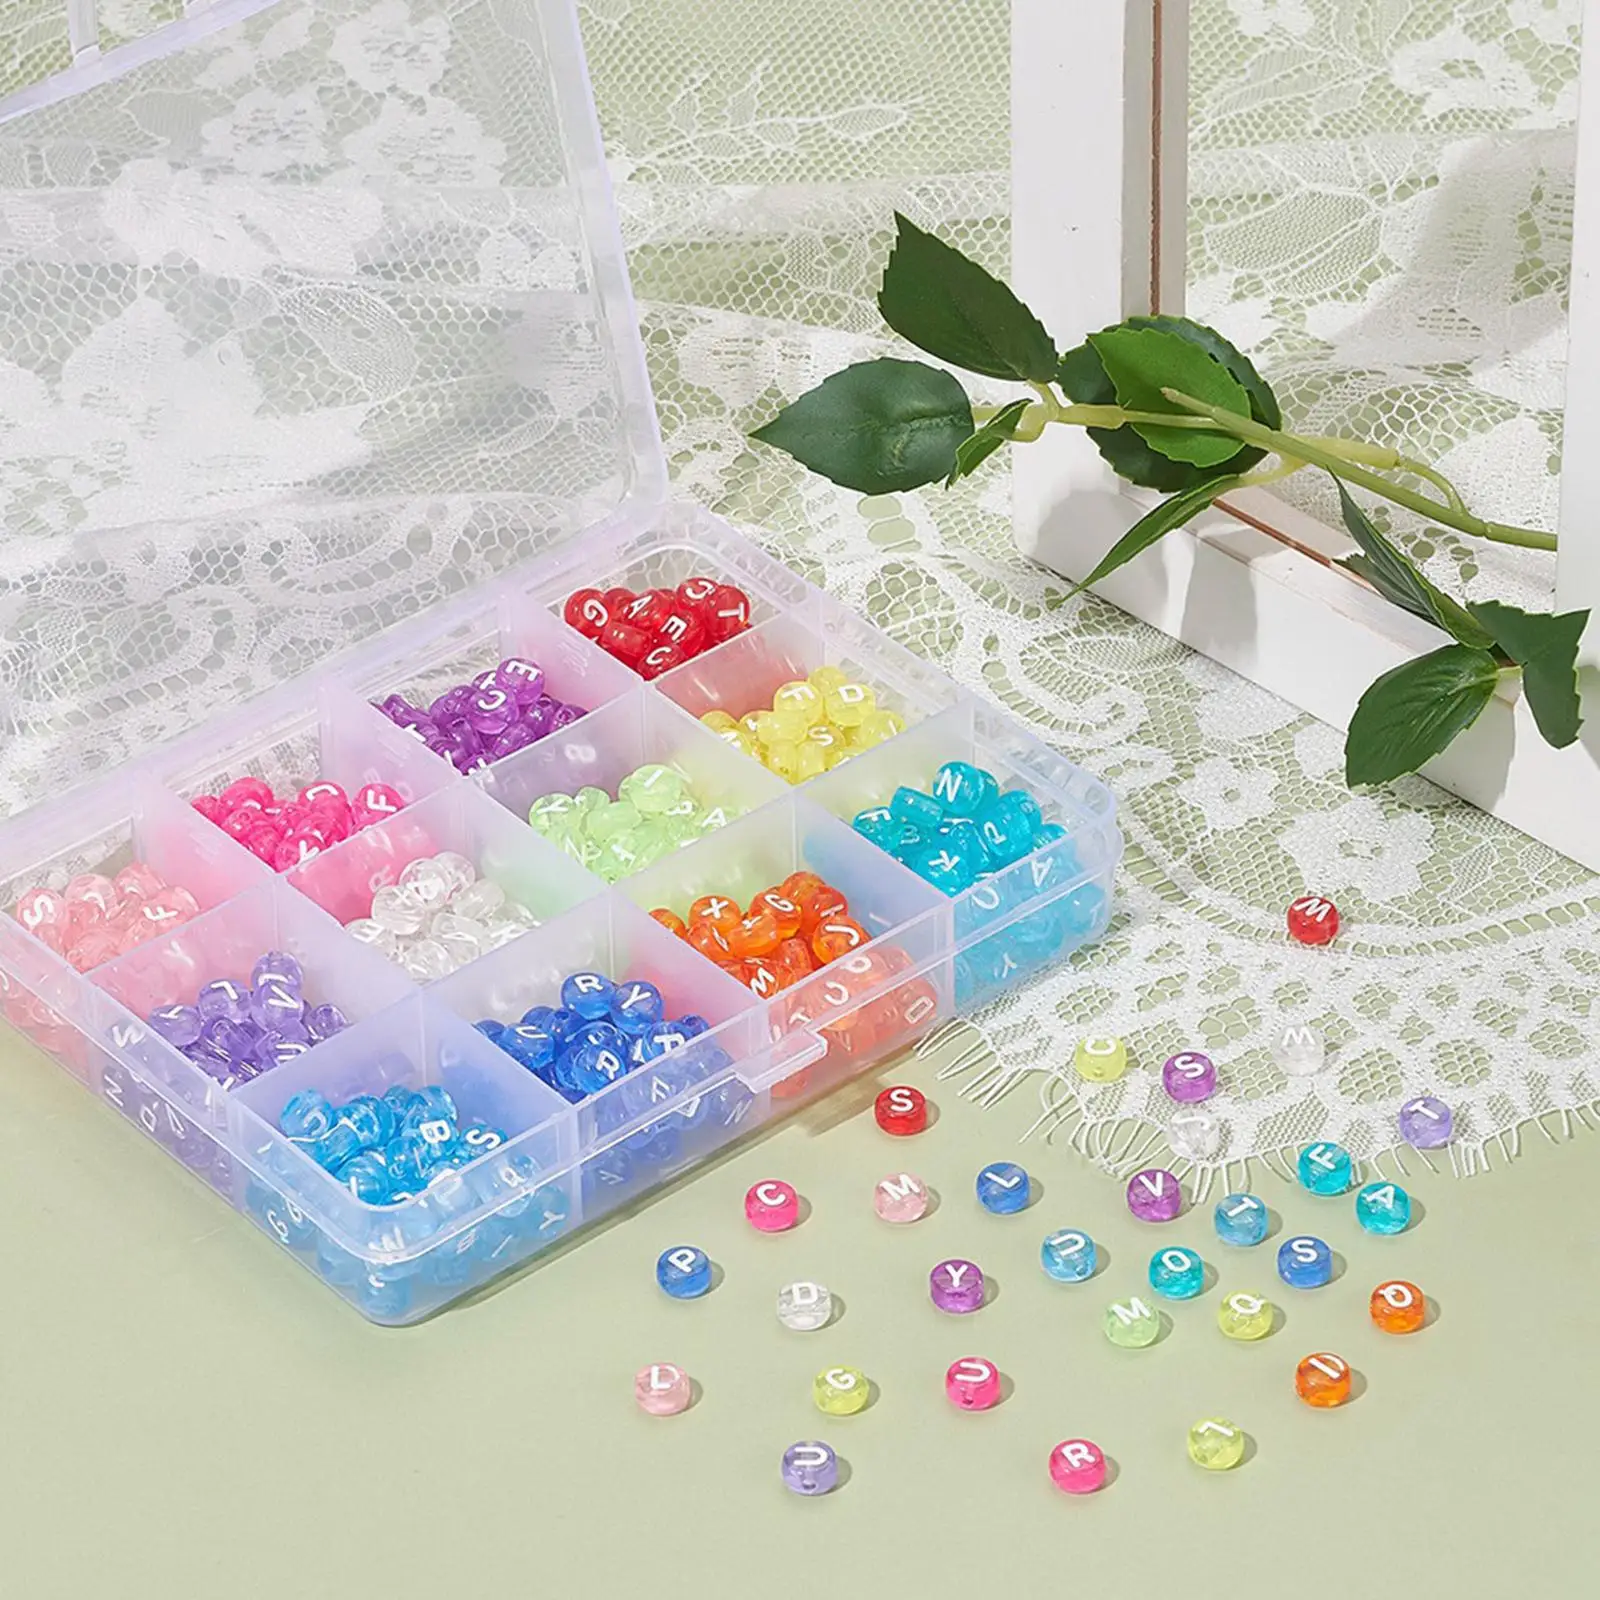 600Pcs Round Acrylic Alphabet Letter Beads DIY Charms Mixed 12Colors A-Z Letter for Crafts Key Chains Earring Necklace Bracelets